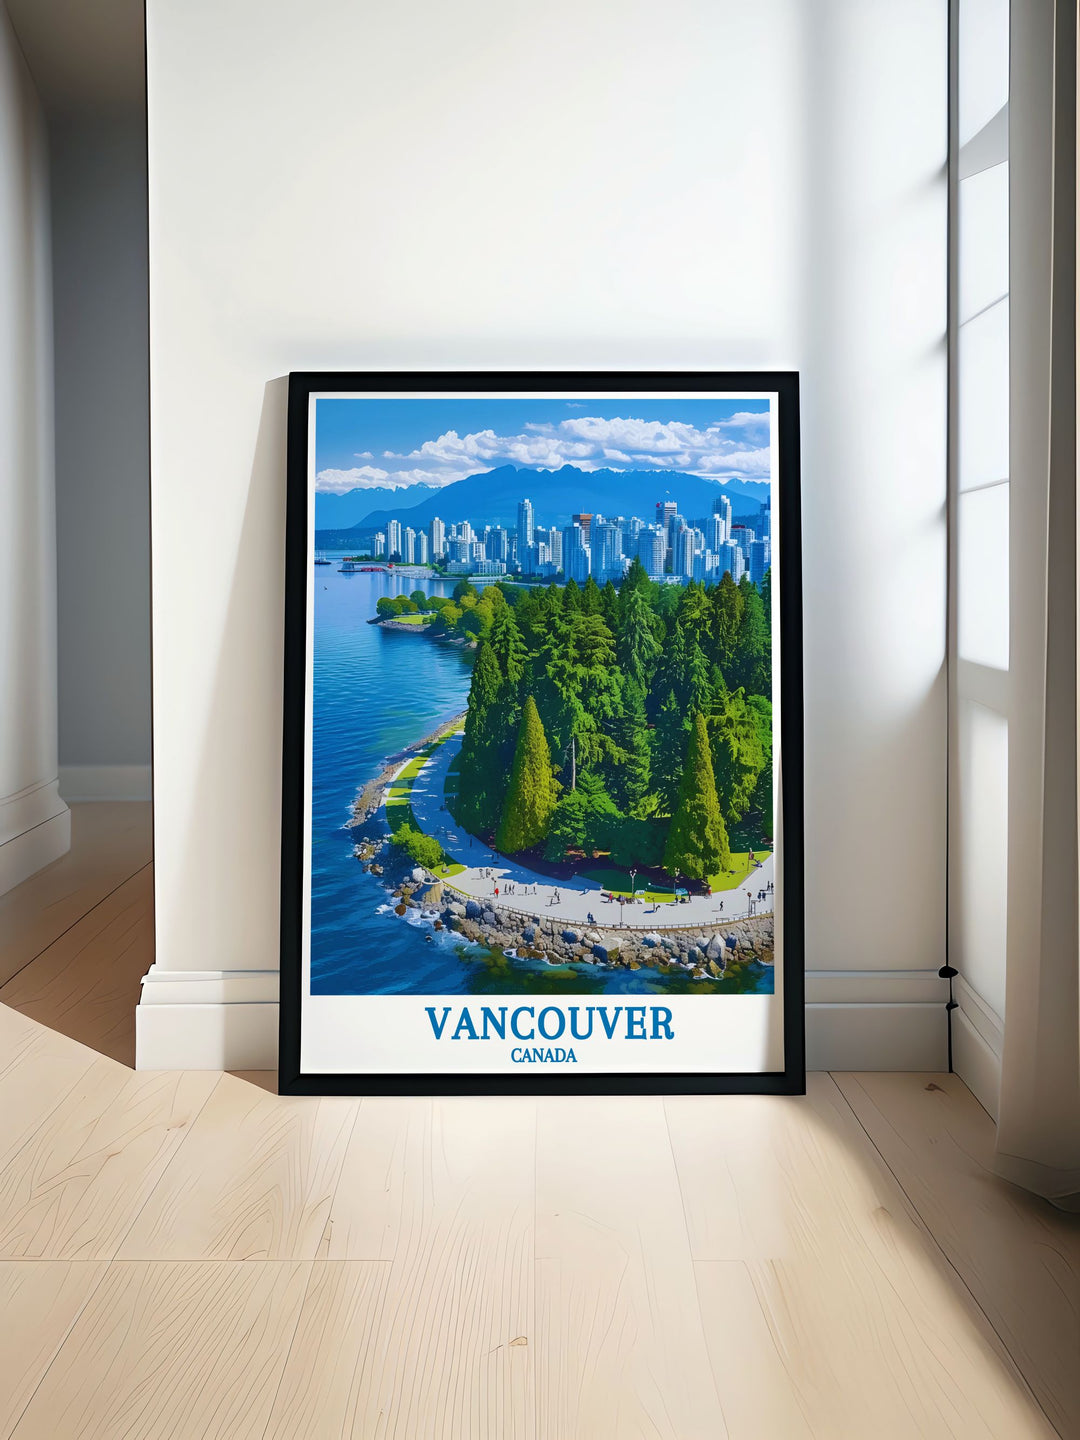 Enhance your home with the beauty of Stanley Parks diverse attractions. This detailed artwork captures the scenic Seawall, Vancouver Aquarium, and lush greenery, offering a dynamic and vibrant touch to your decor, perfect for travel and nature enthusiasts.